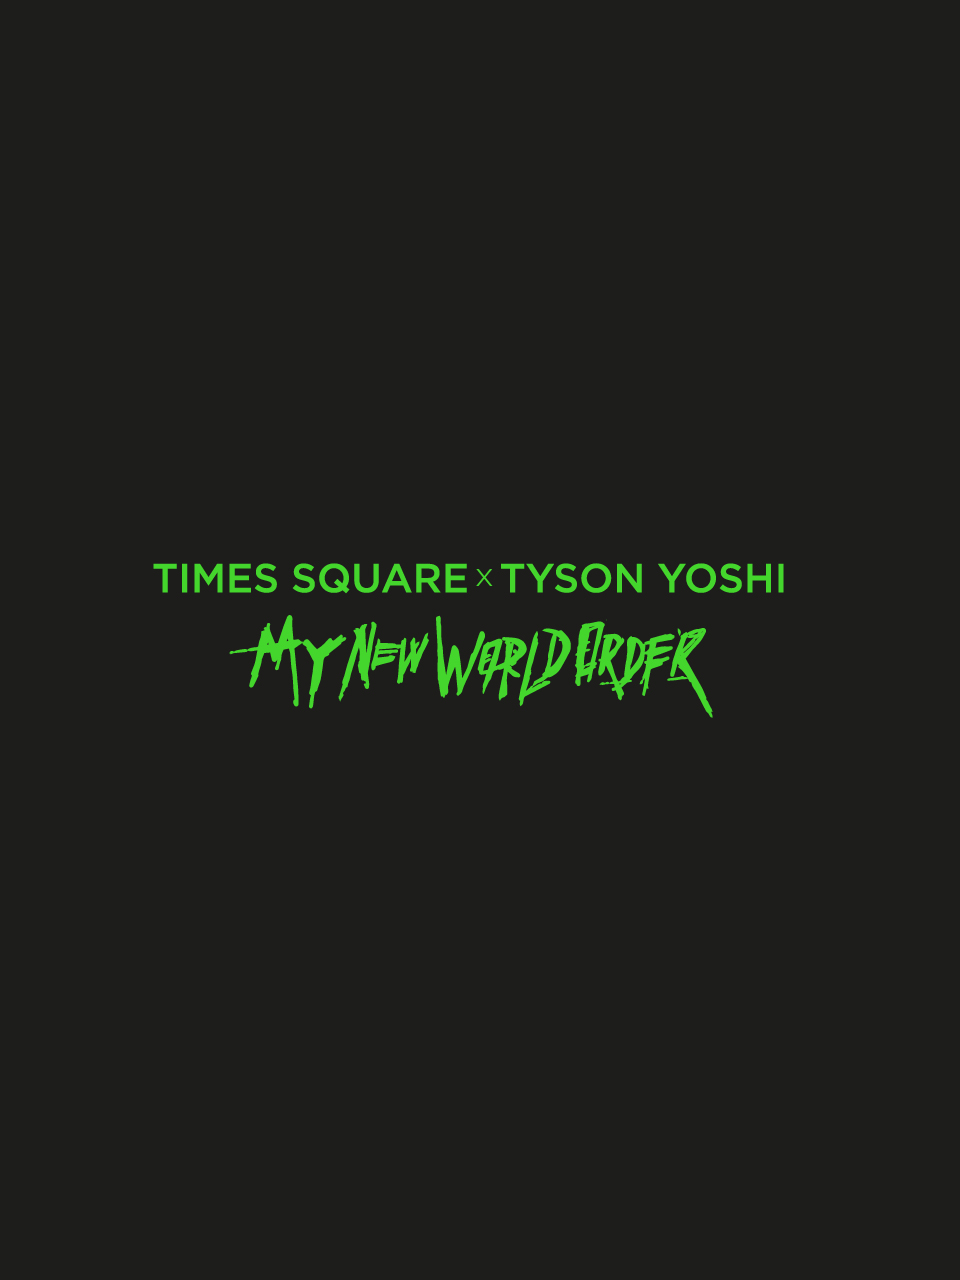 Times Square x TYSON YOSHI 《 MY NEW WORLD ORDER 》Gift Redemption